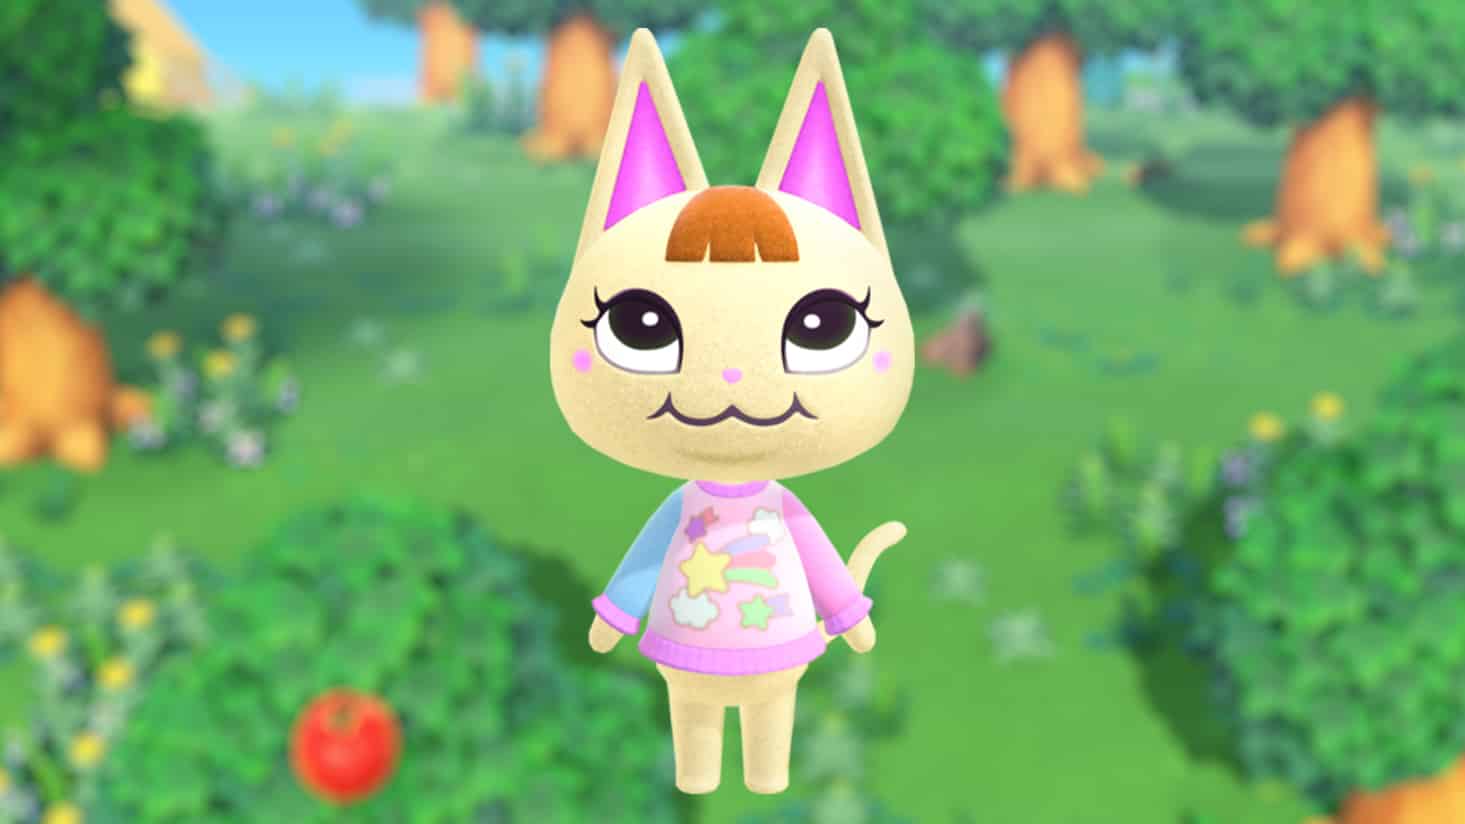 Villager Merry from Animal Crossing: New Horizons